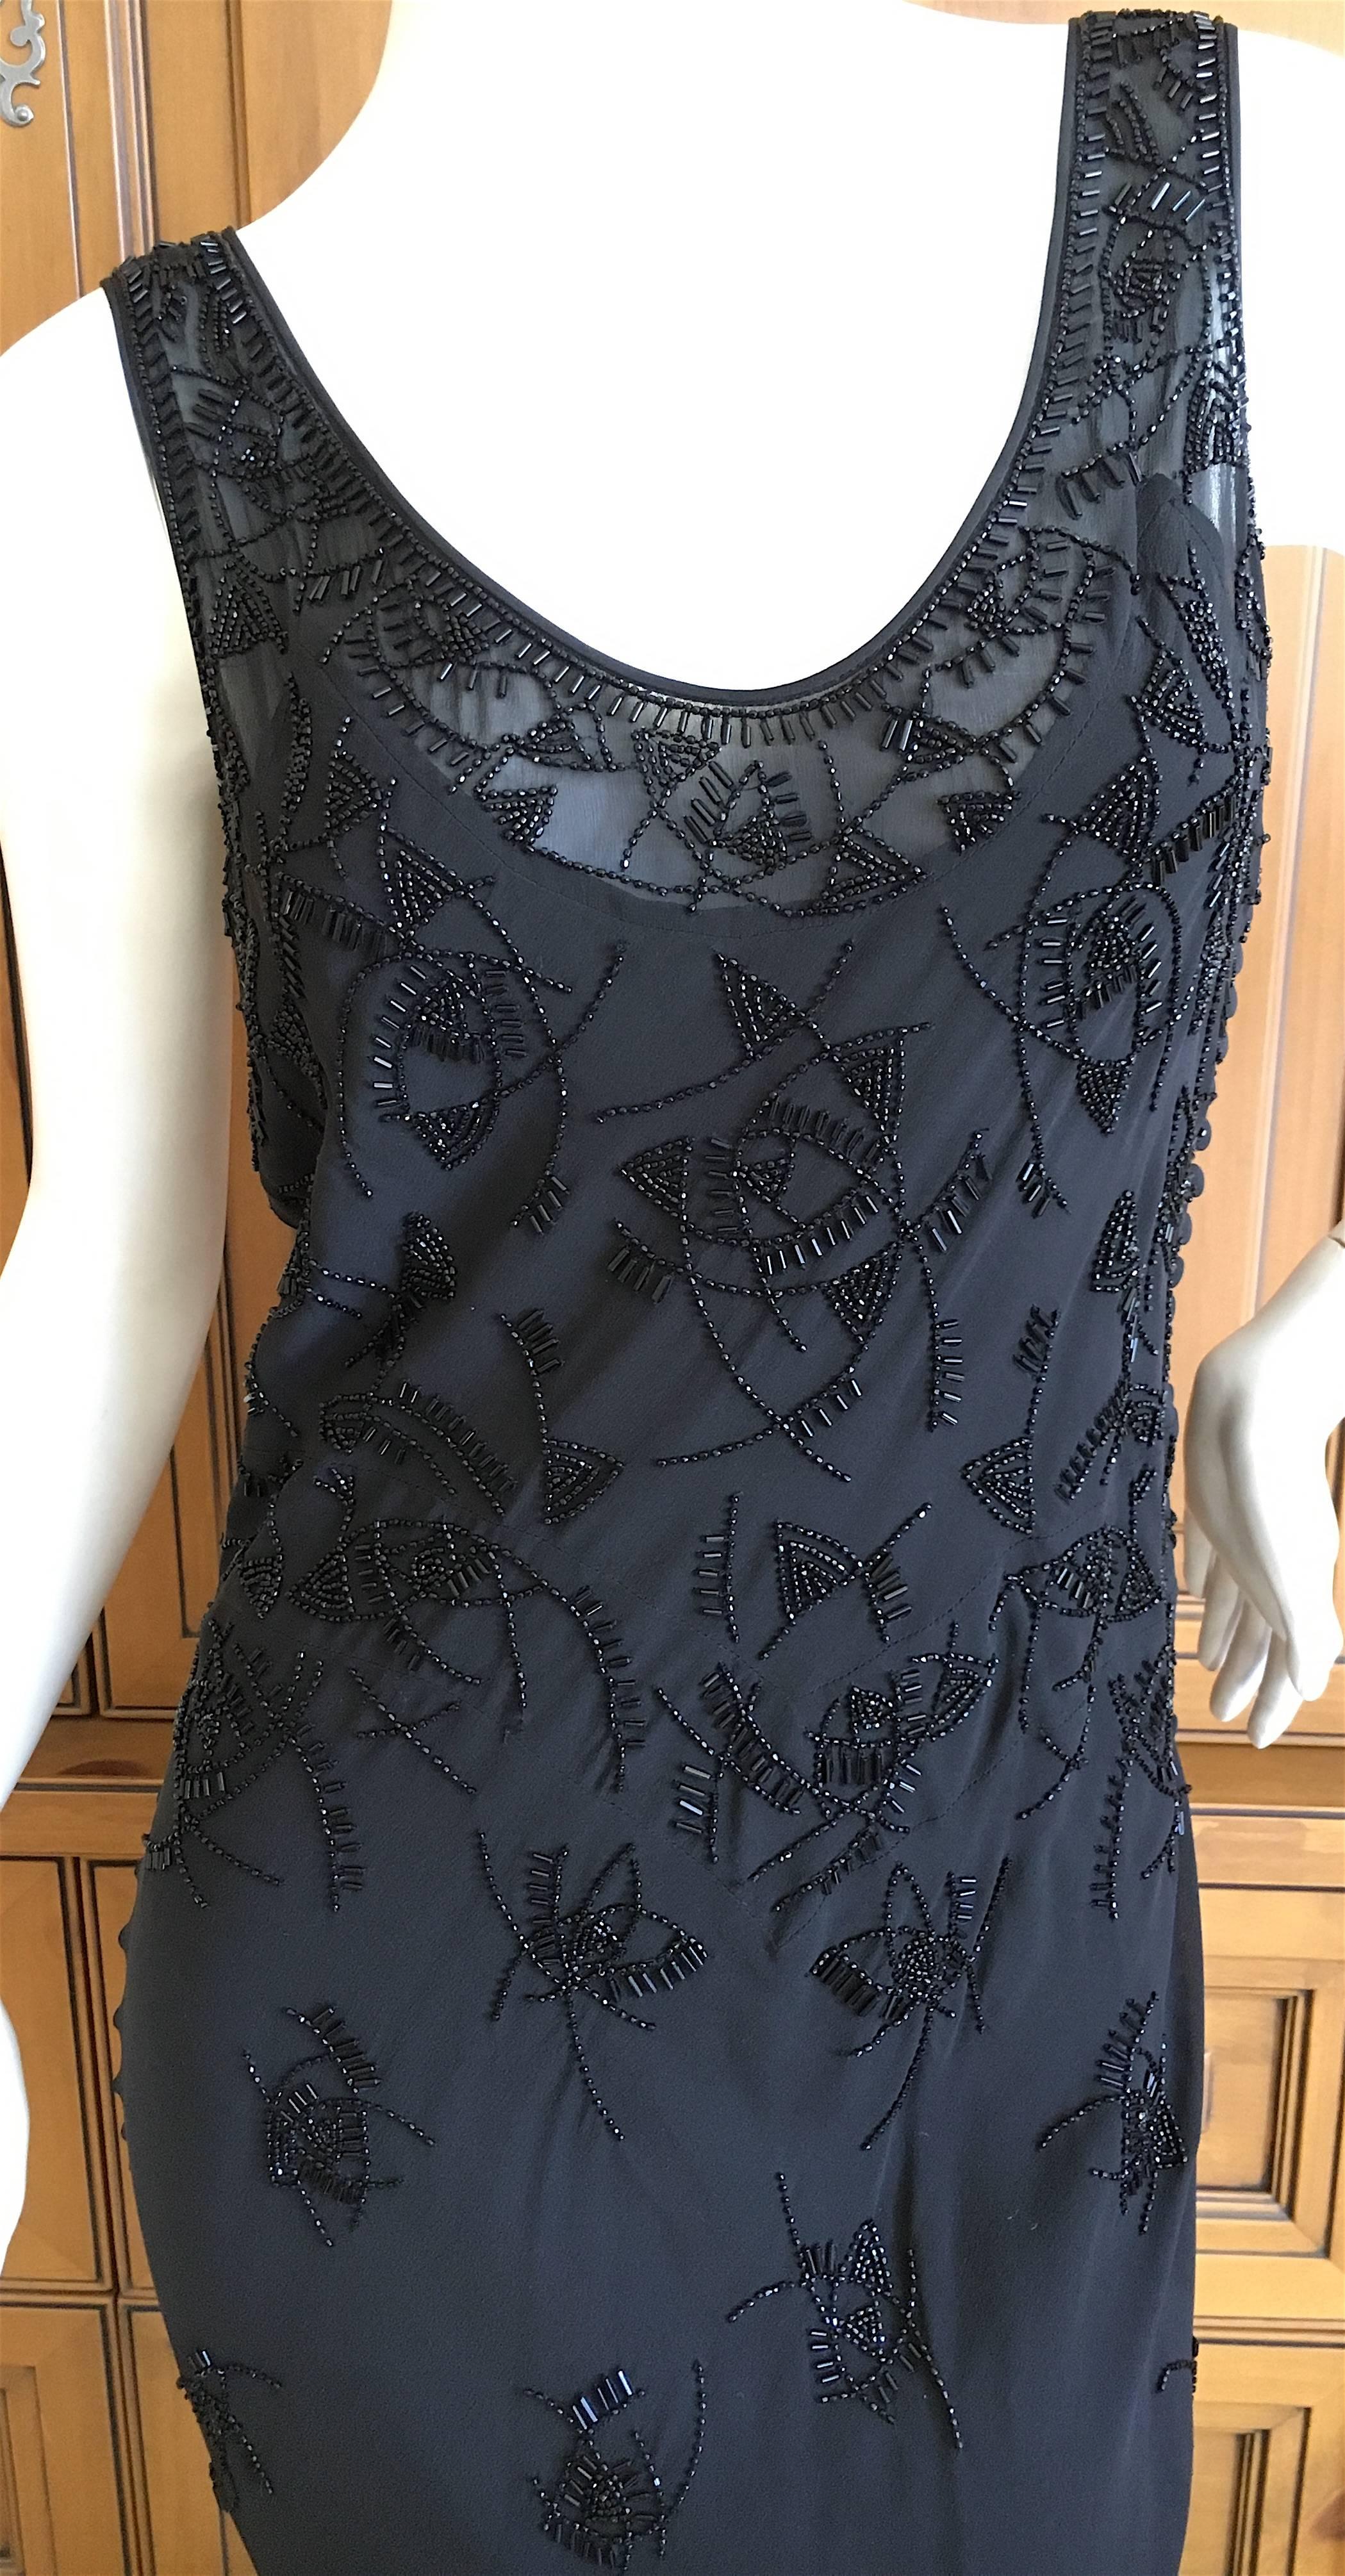 Christian Dior by John Galliano Bead Embellished Black Evening Dress In Excellent Condition For Sale In Cloverdale, CA